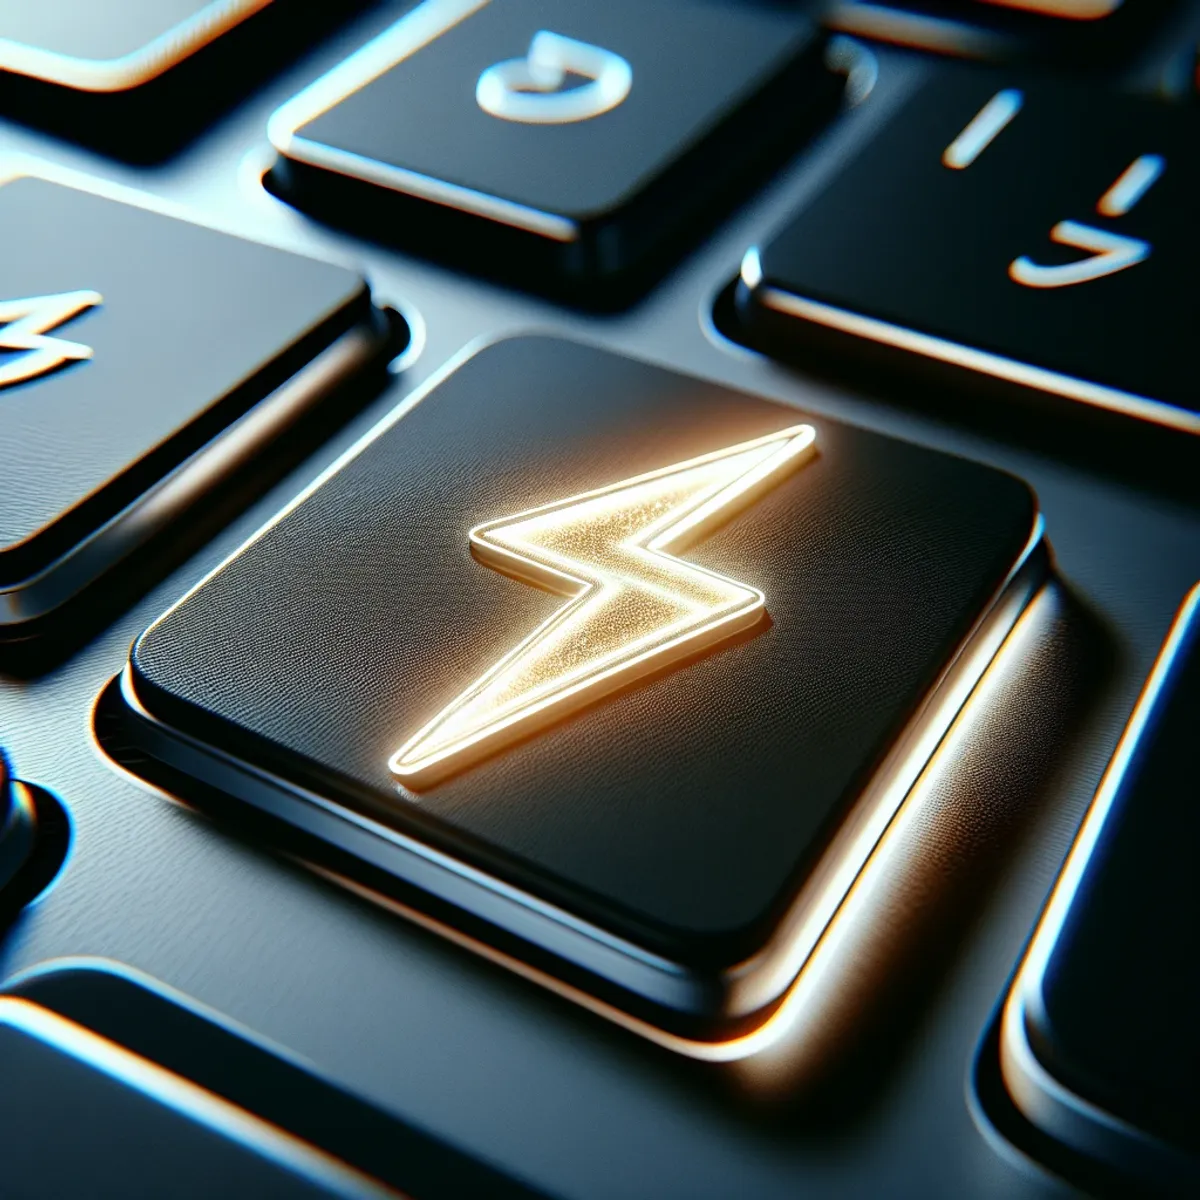 A modern black laptop keyboard with a glowing metallic lightning bolt symbol representing speed and efficiency.